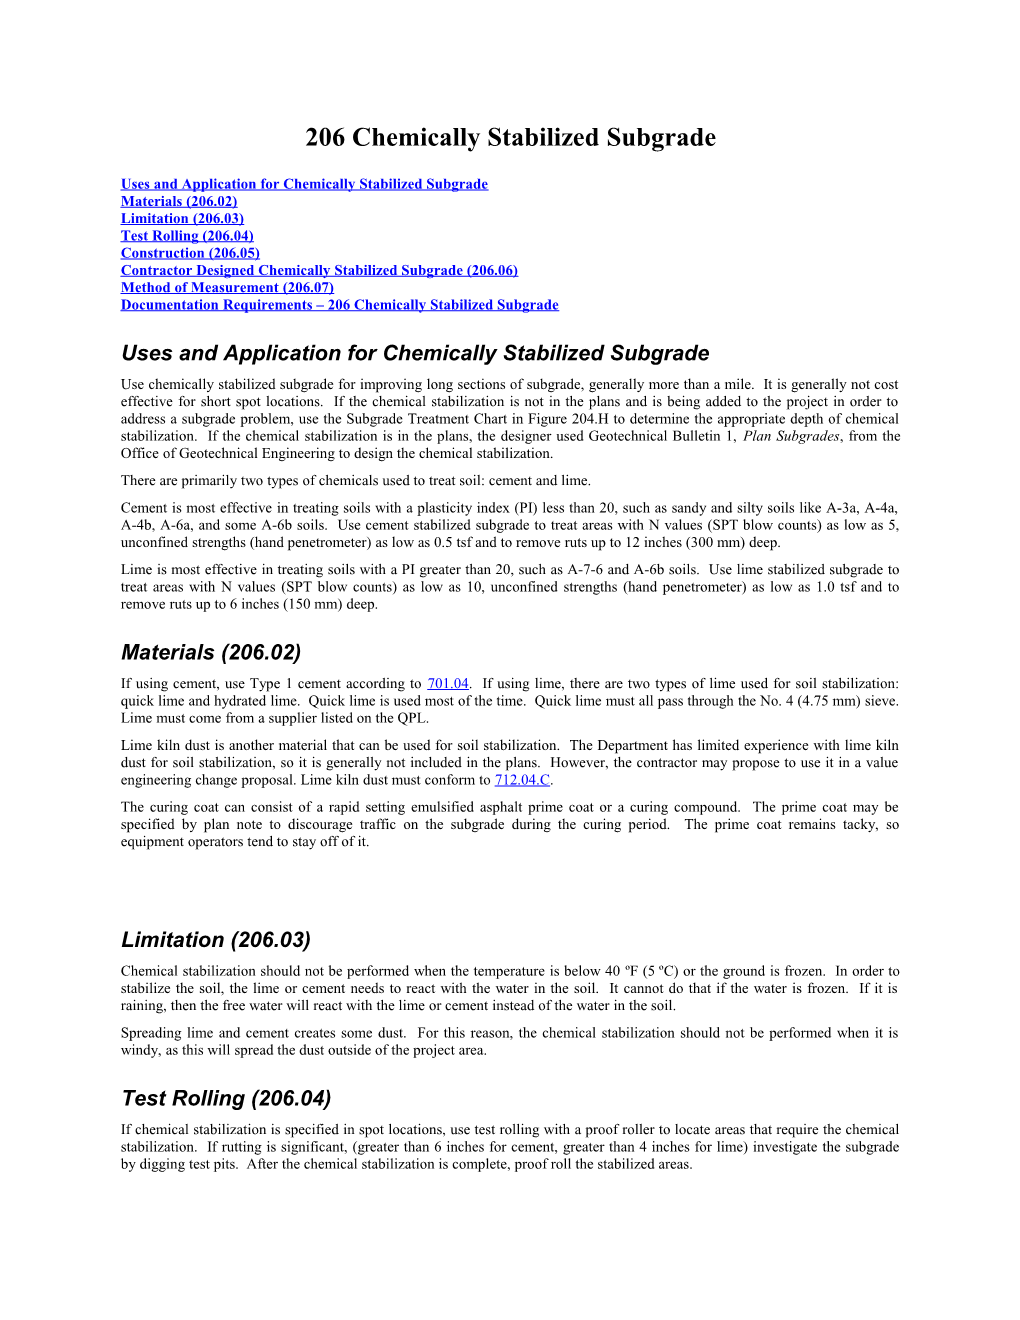 Uses and Application for Chemically Stabilized Subgrade